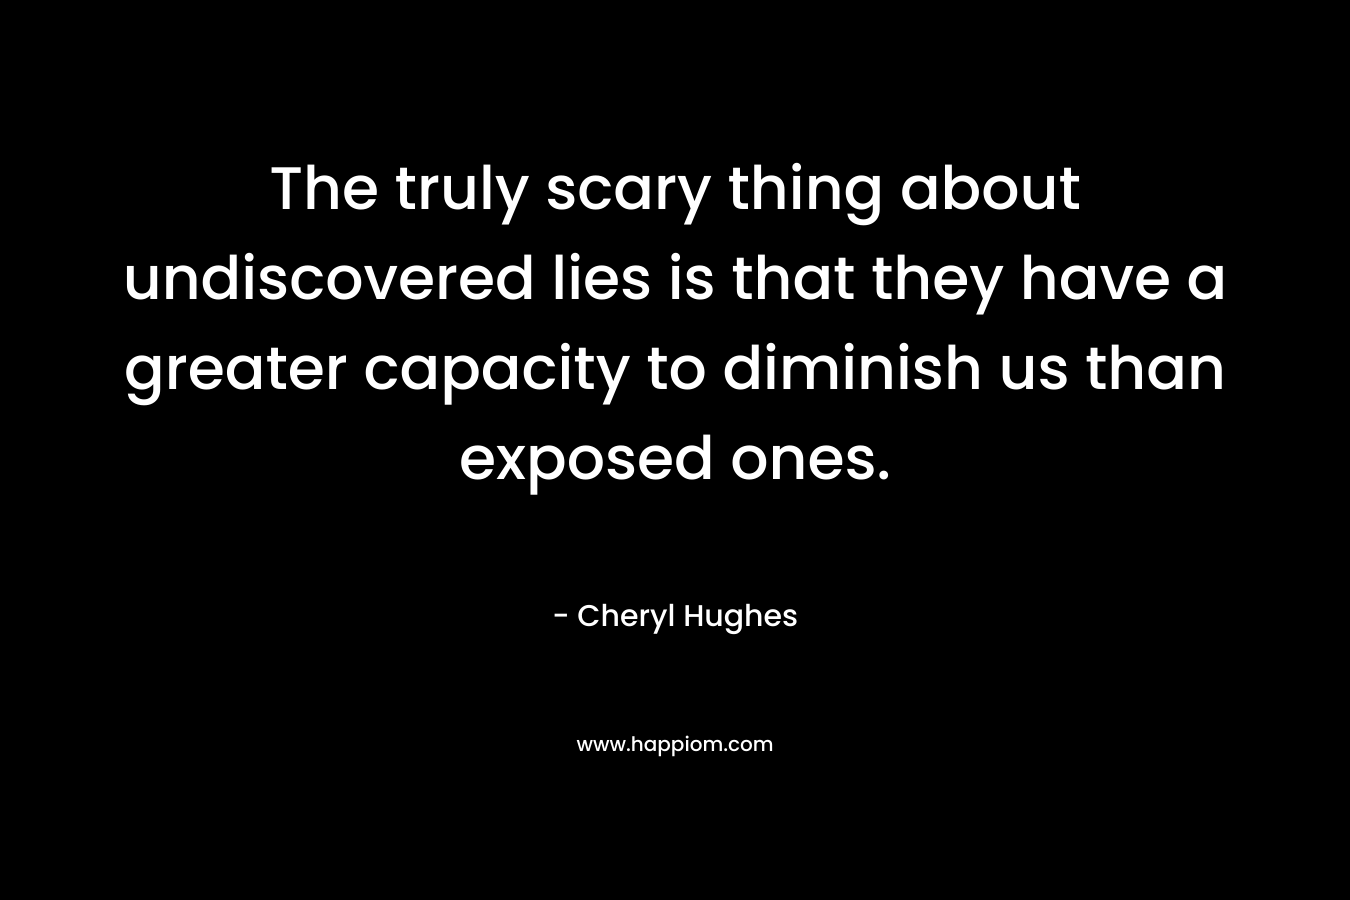 The truly scary thing about undiscovered lies is that they have a greater capacity to diminish us than exposed ones. – Cheryl Hughes